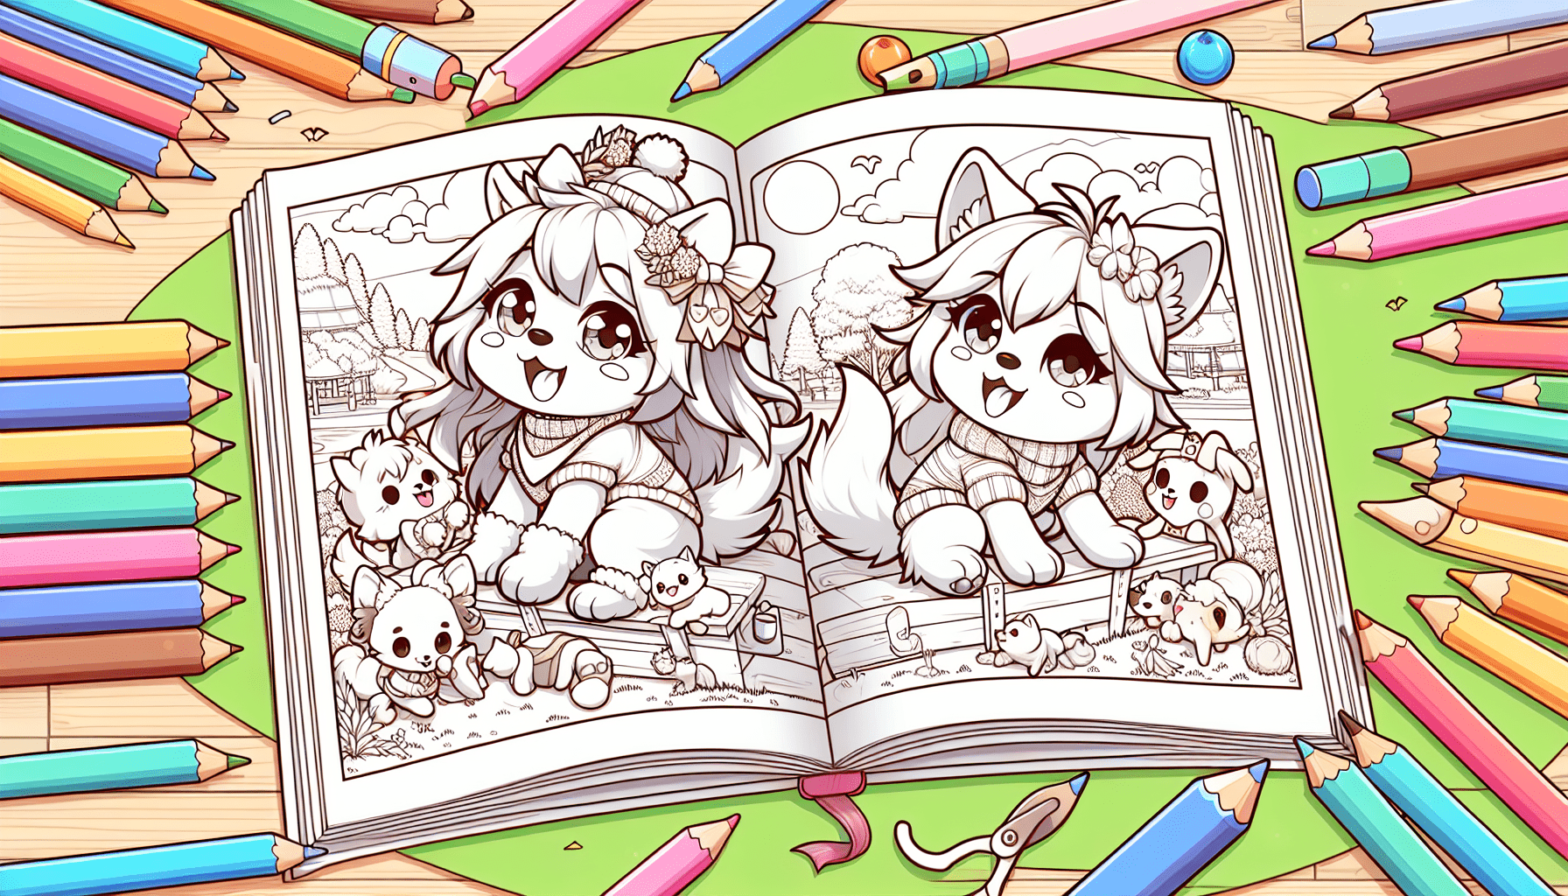 bluey coloring book anime style designs for relaxation and fun 1